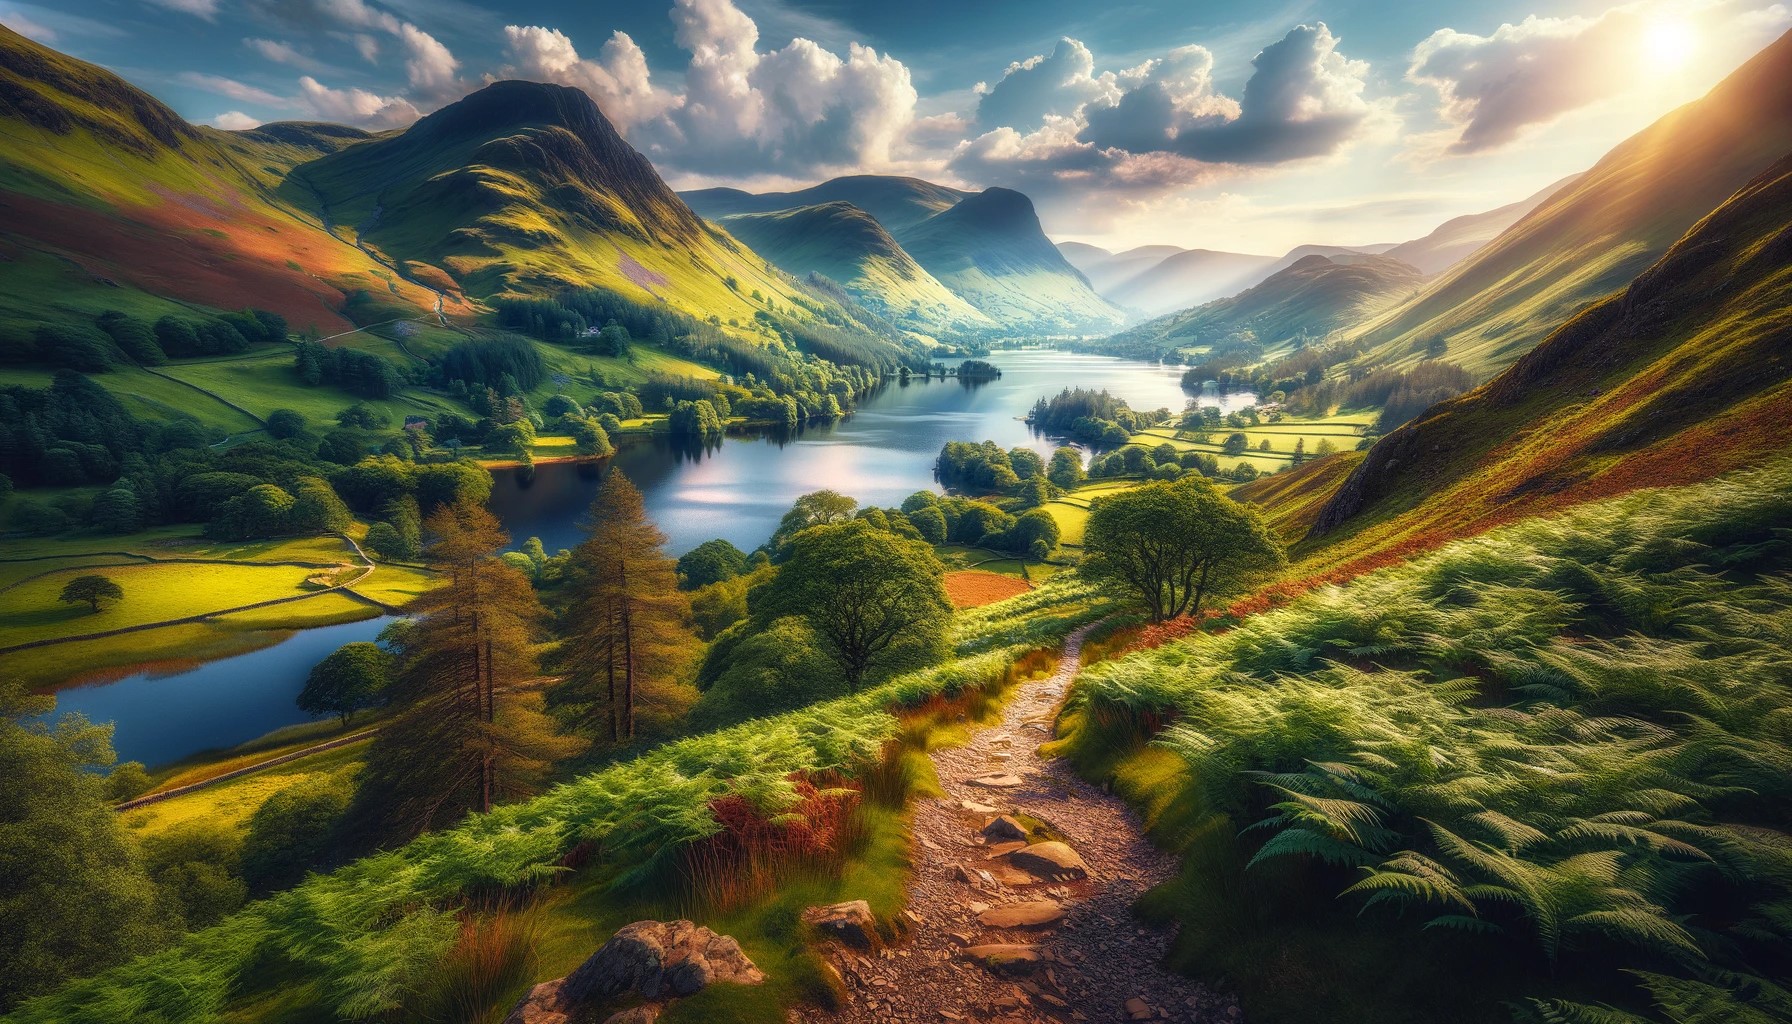 A scenic view of the Lake District in England, showcasing a picturesque hiking trail winding through lush greenery. In the background, majestic mountains